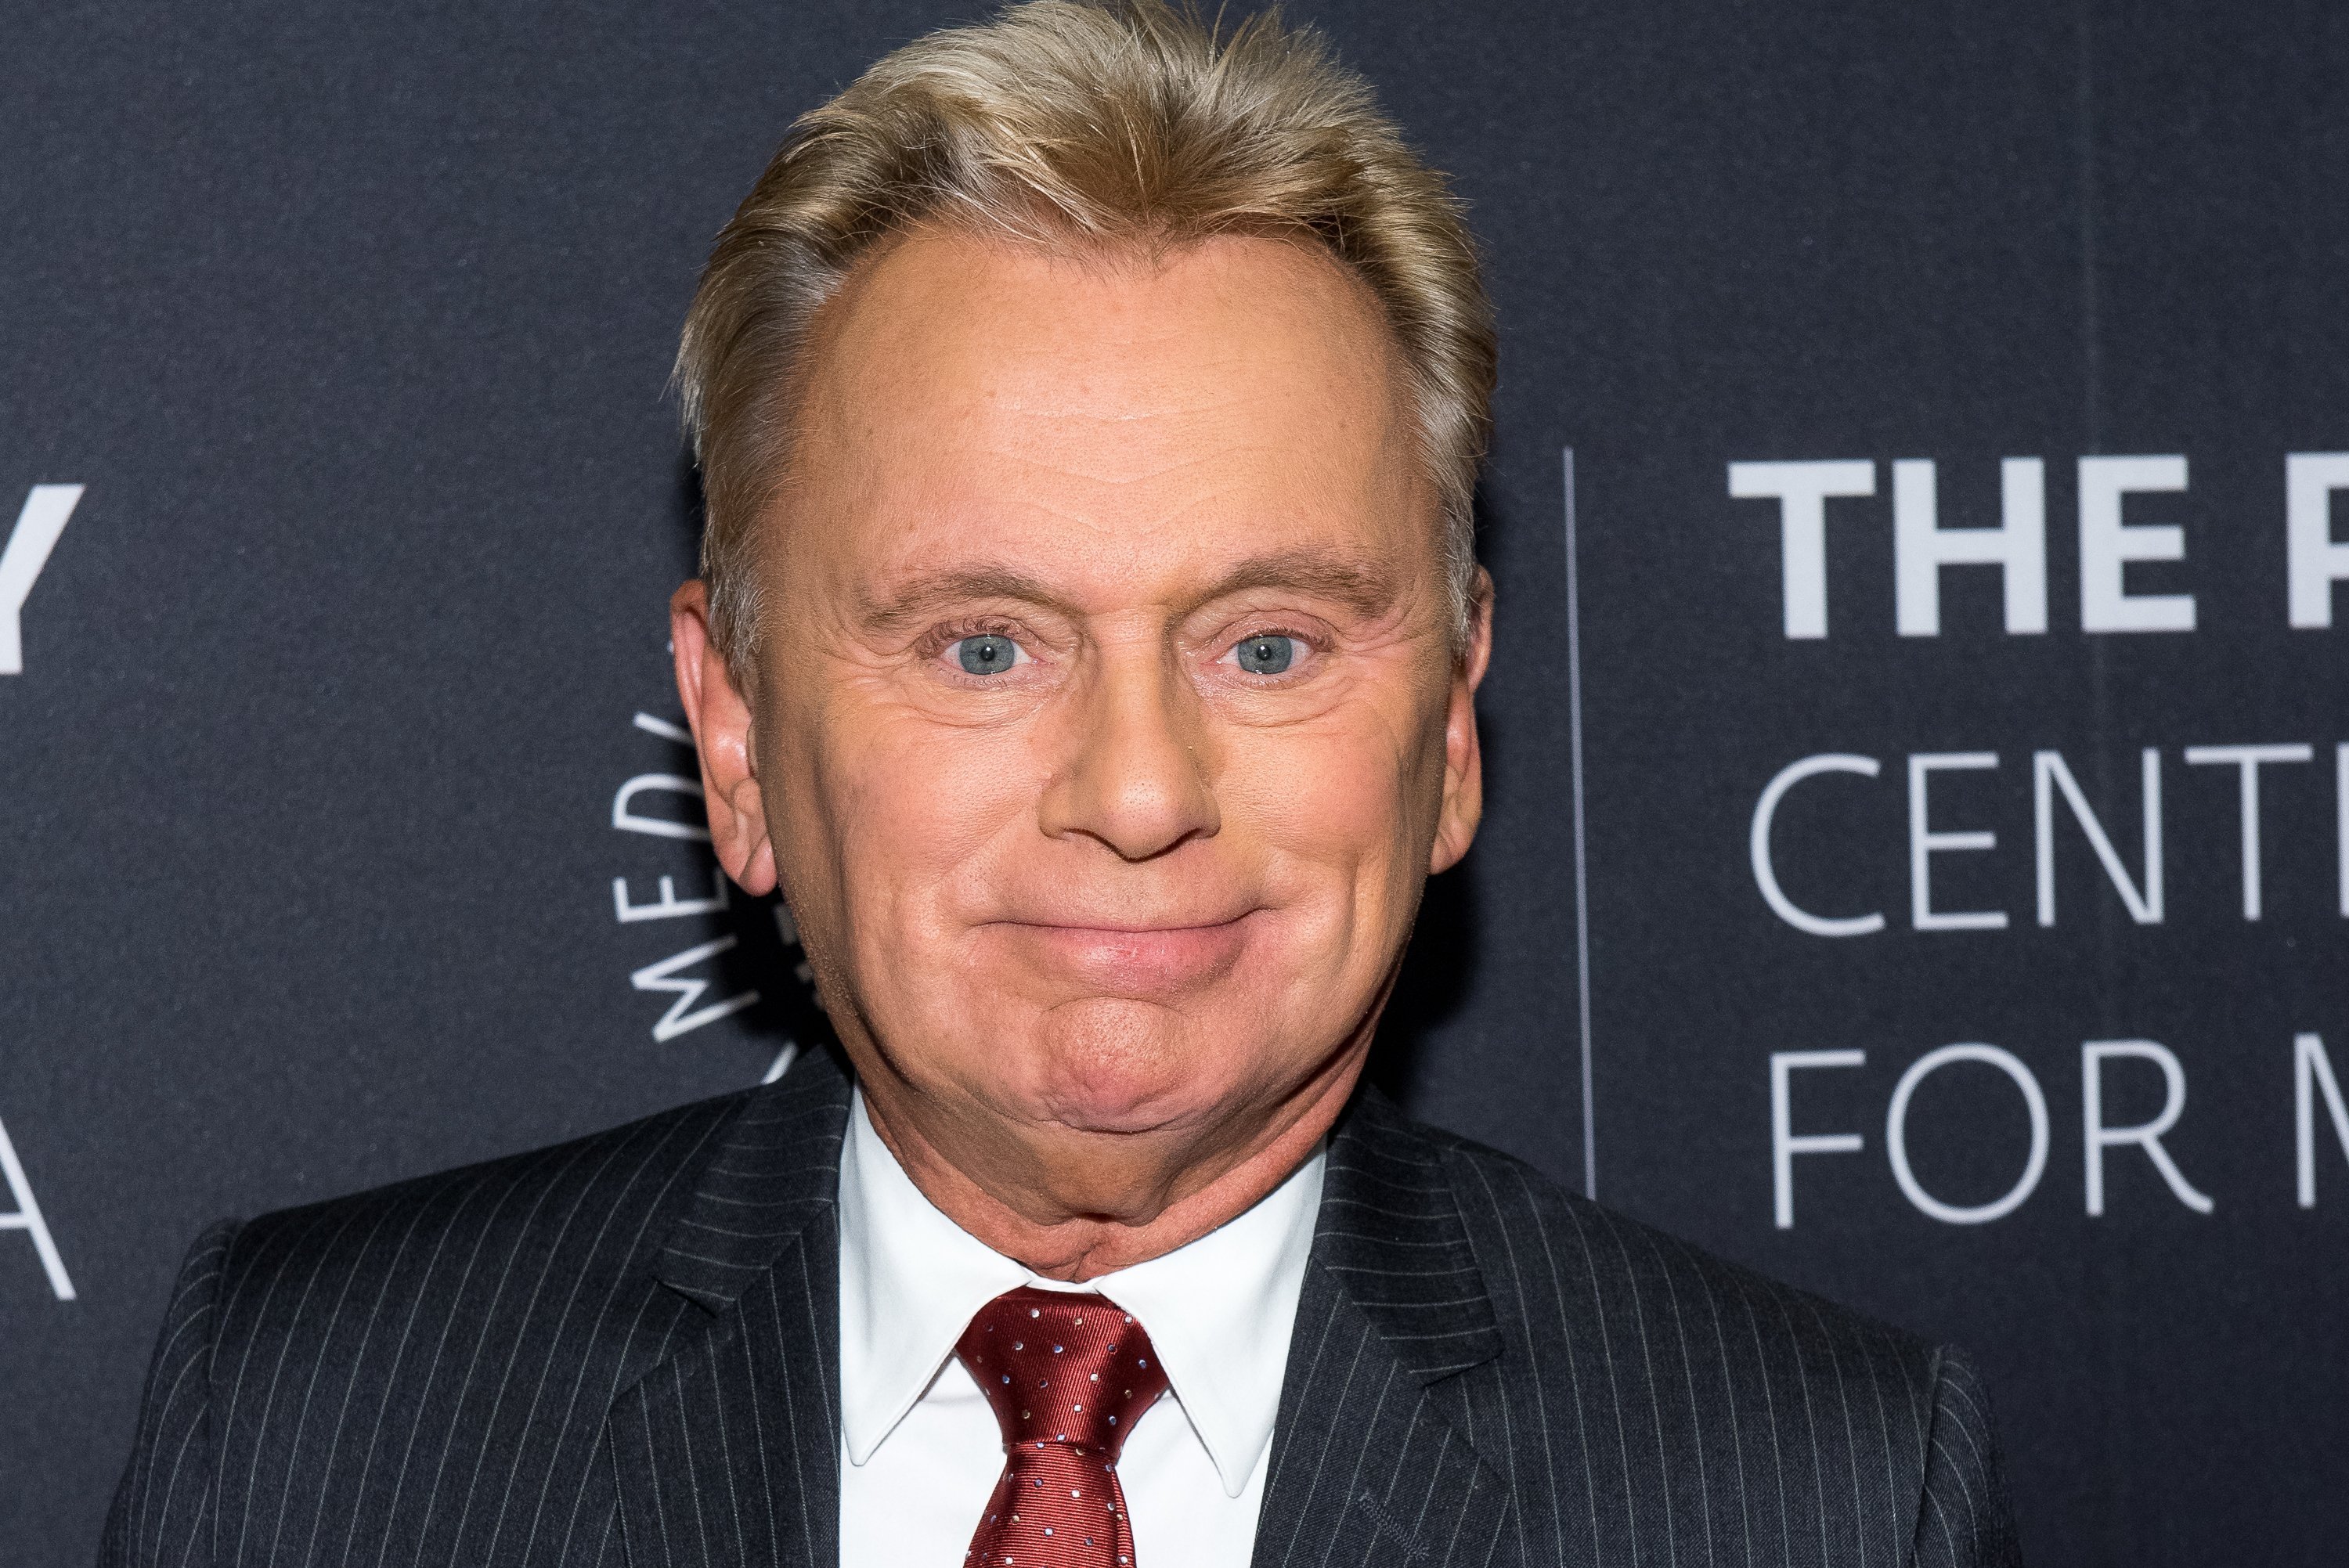 Pat Sajak at The Paley Center for Media on November 15, 2017 in New York City | Source: Getty Images